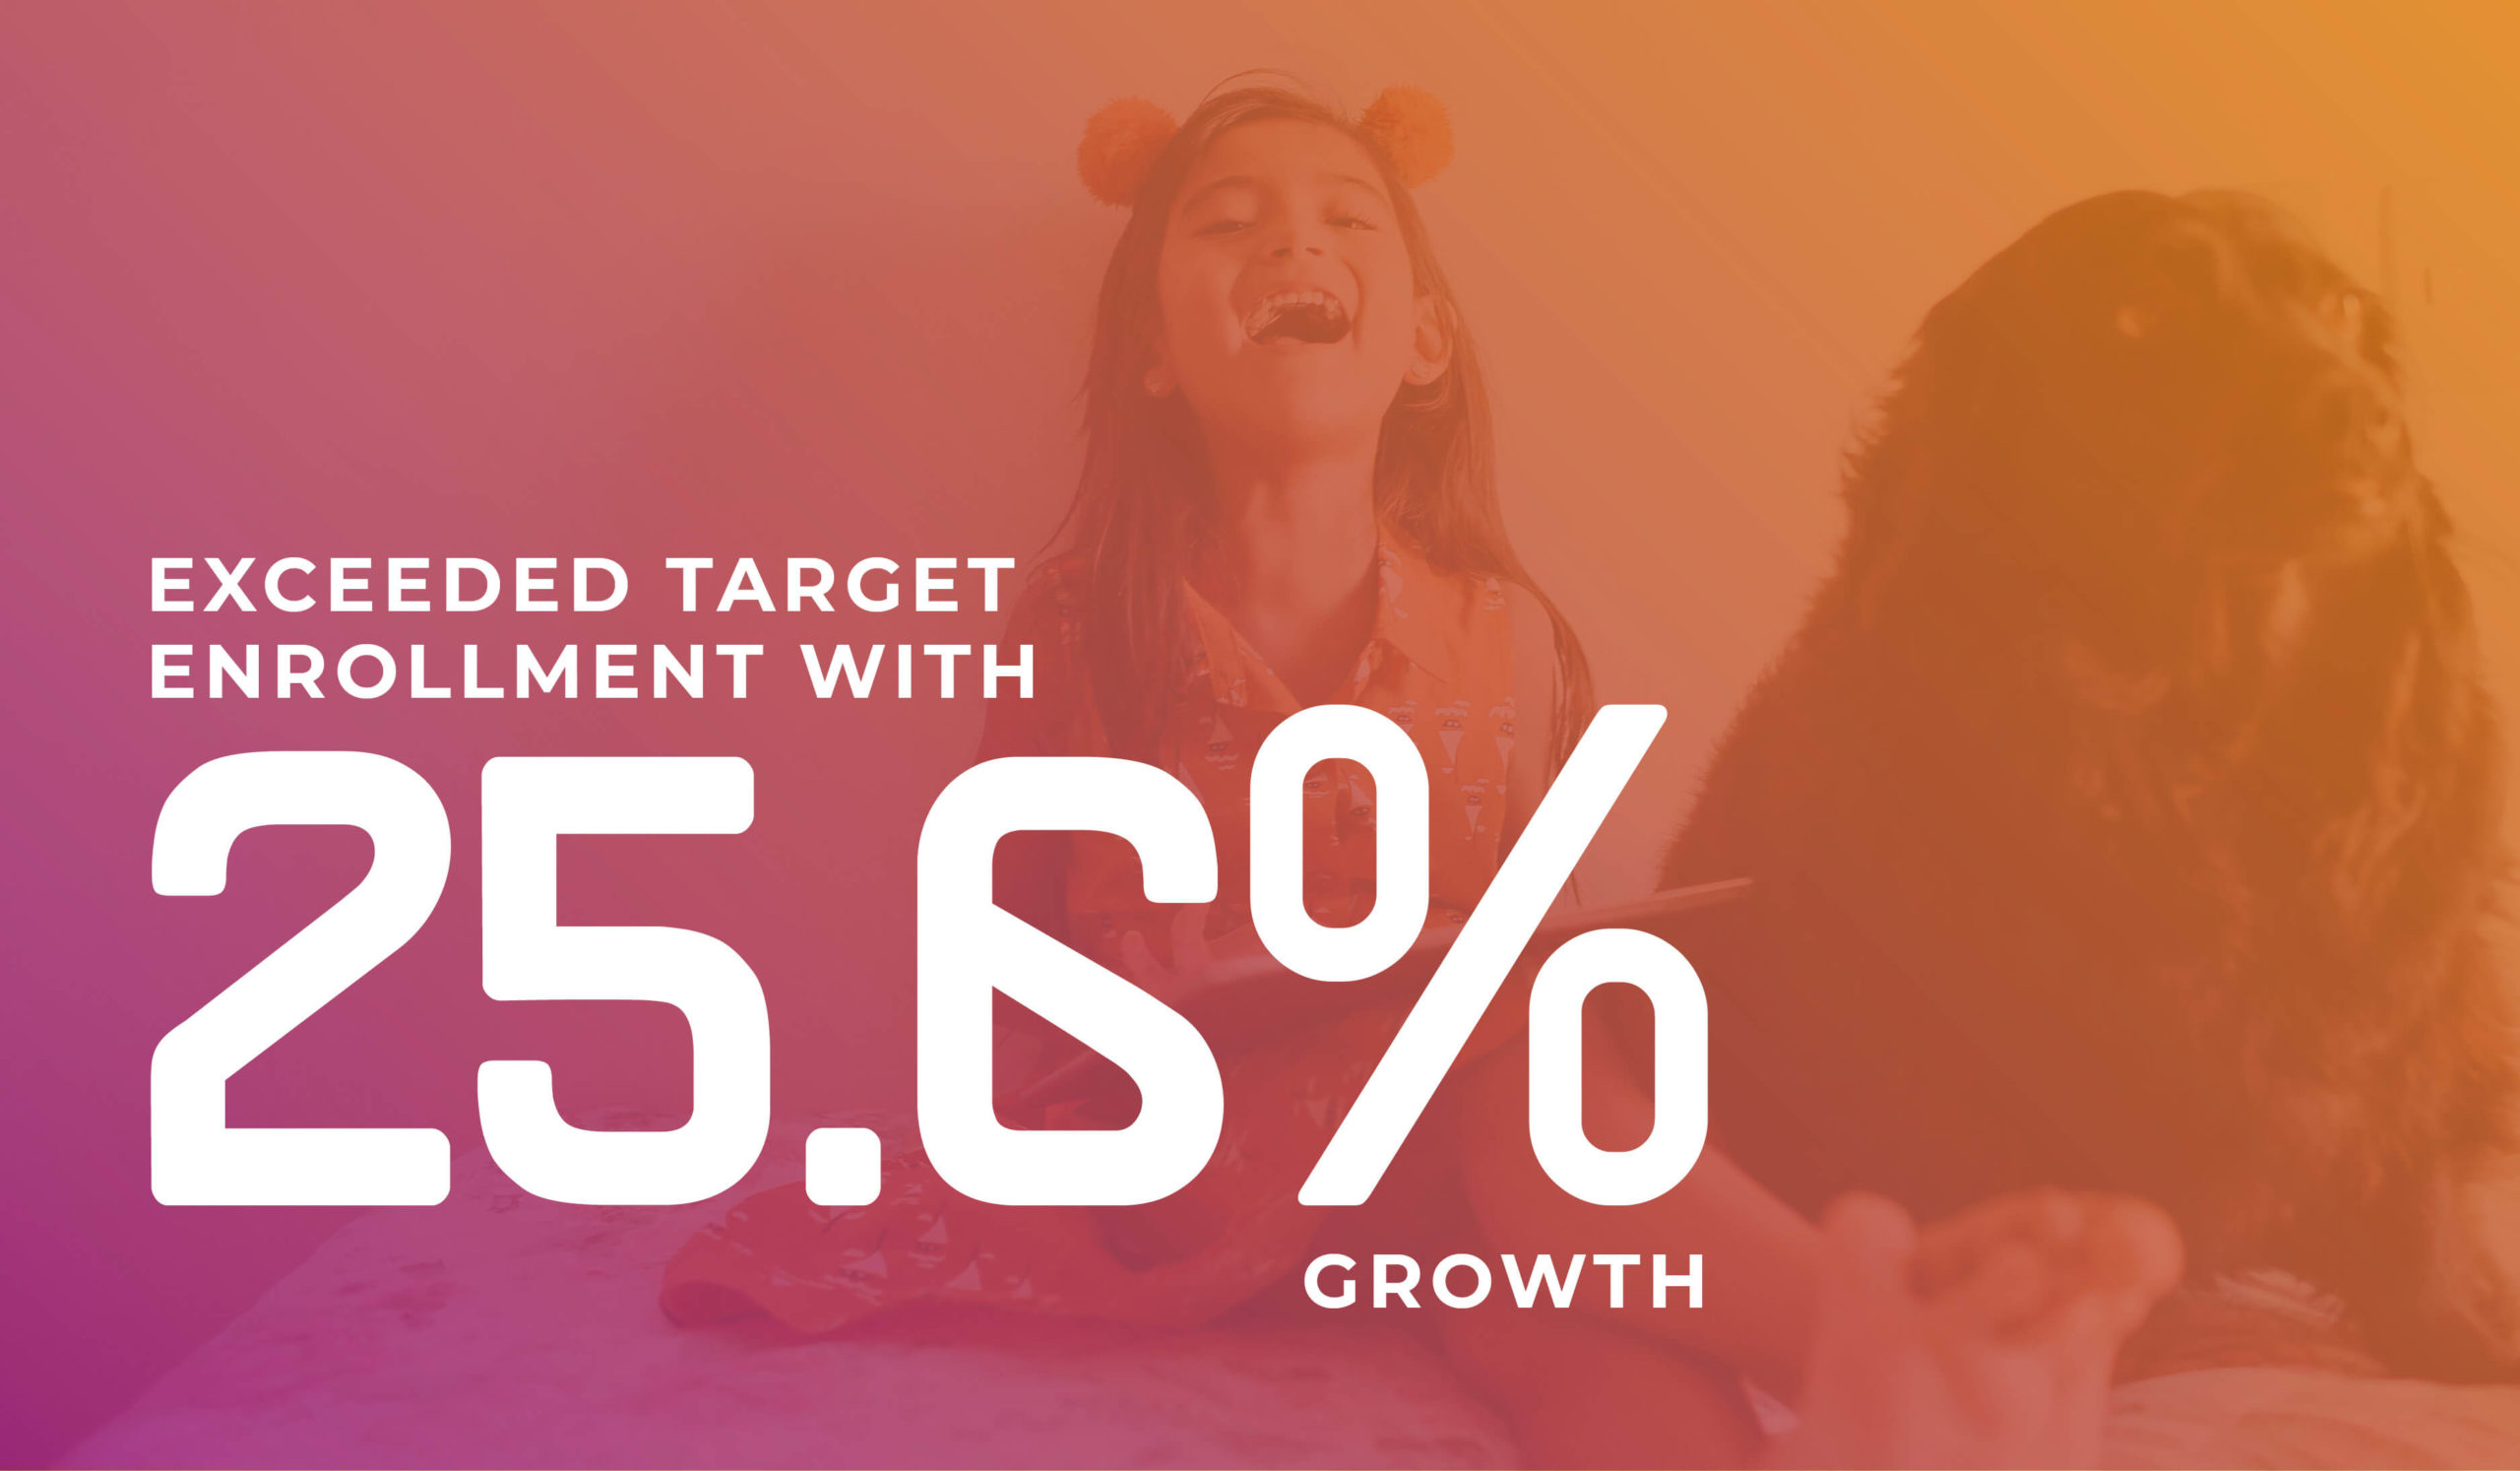 exceeding target enrollment with 25.6% growth